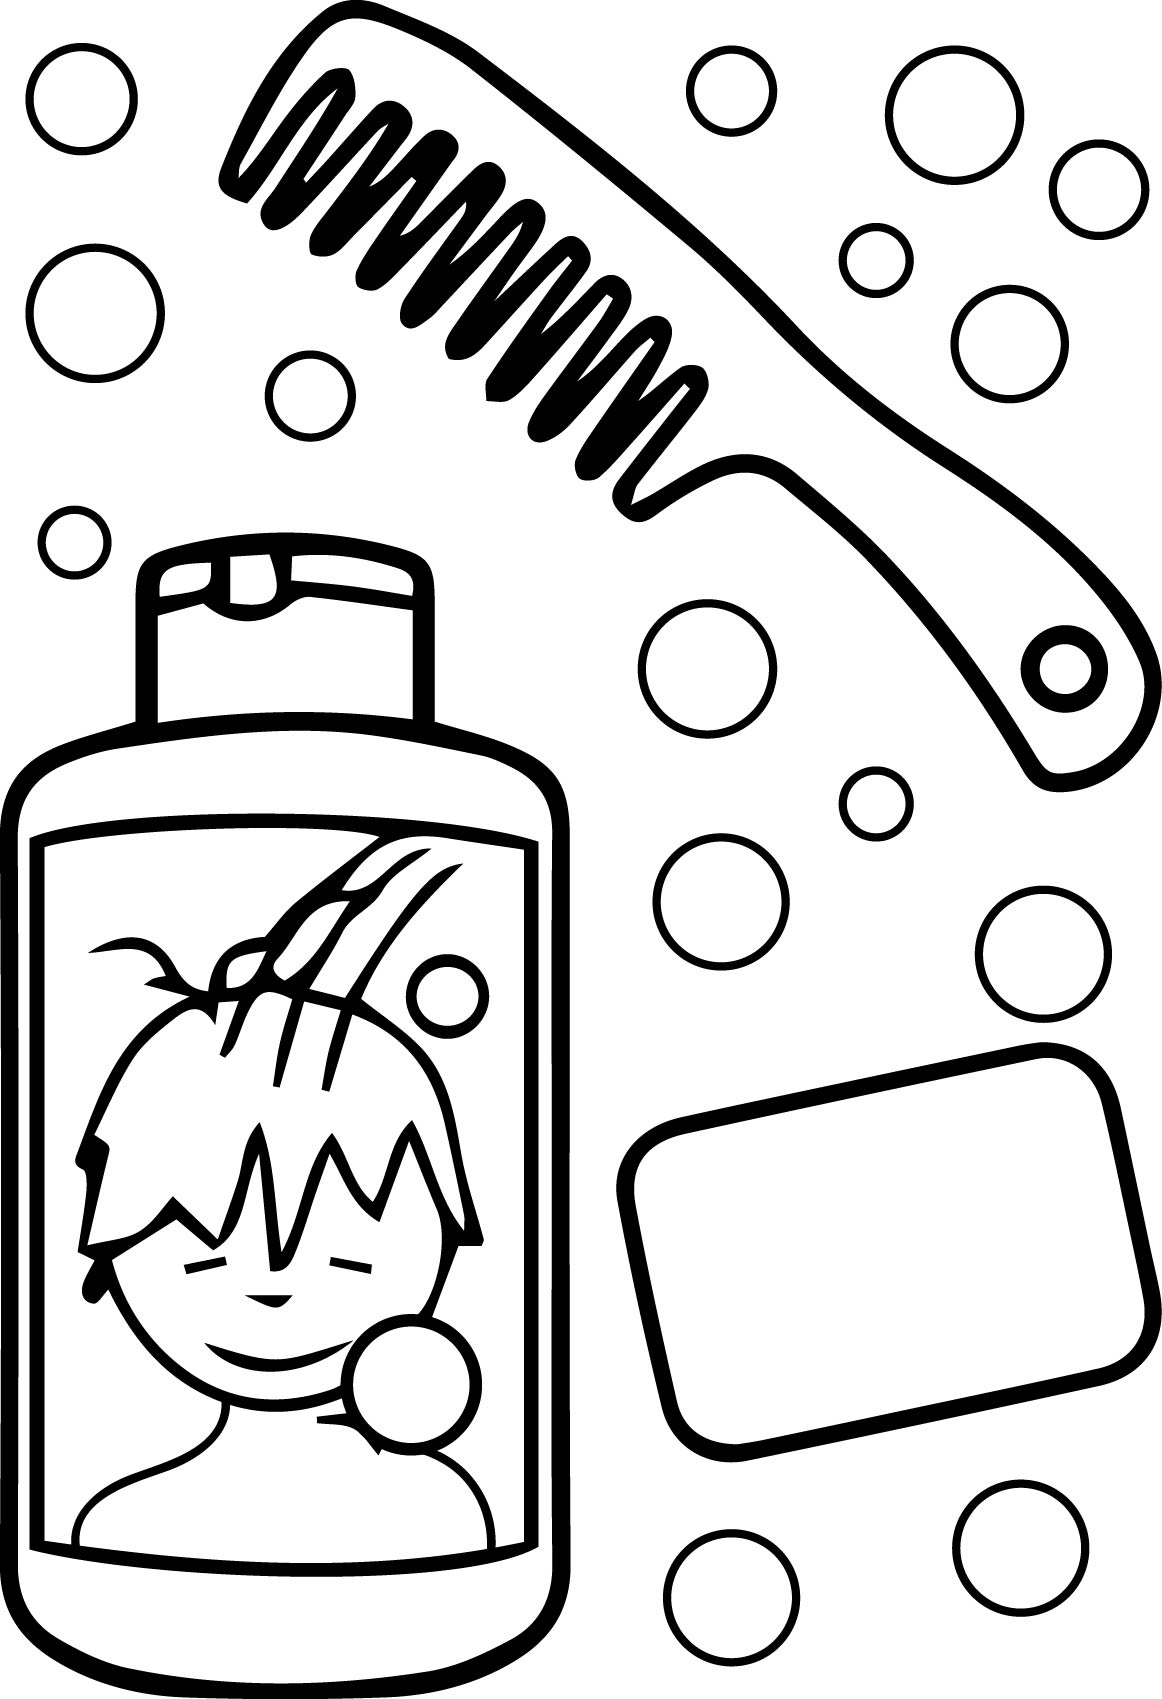 Hygiene Coloring Pages to download and print for free